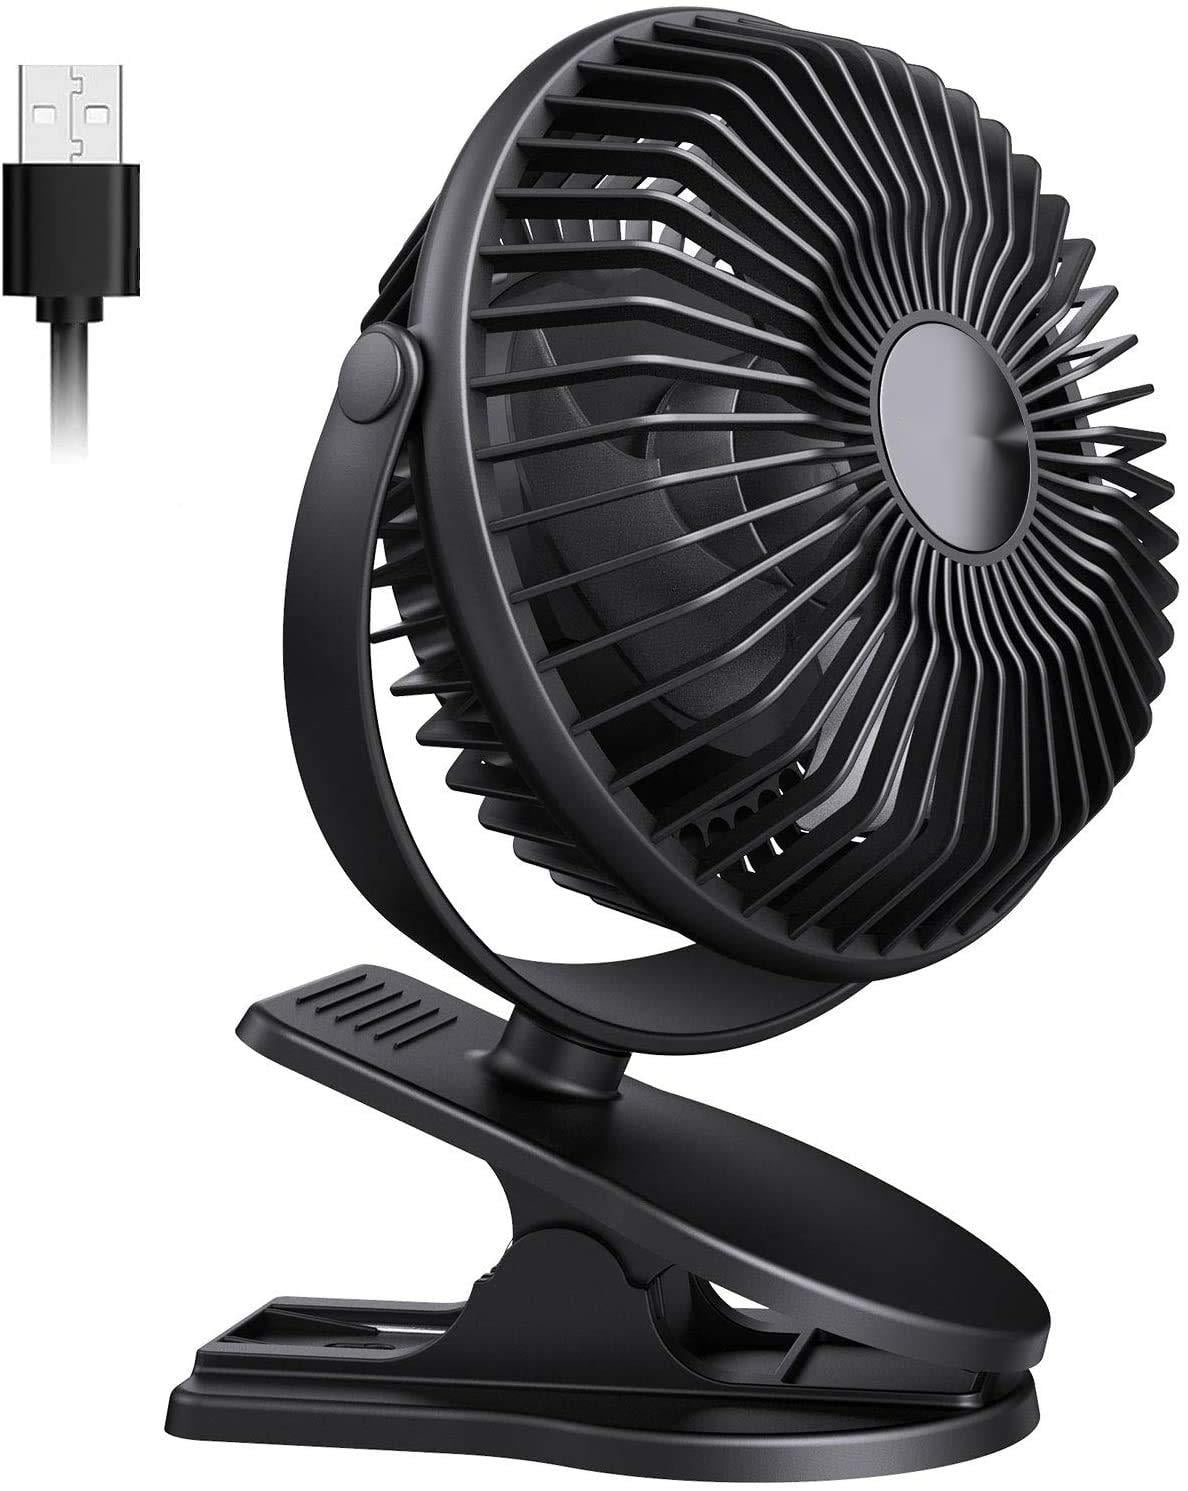 2 X Clip On 2 in 1 Fan Portable Desk Table 2 Speed Tilt Office Home Cool Air 6" 